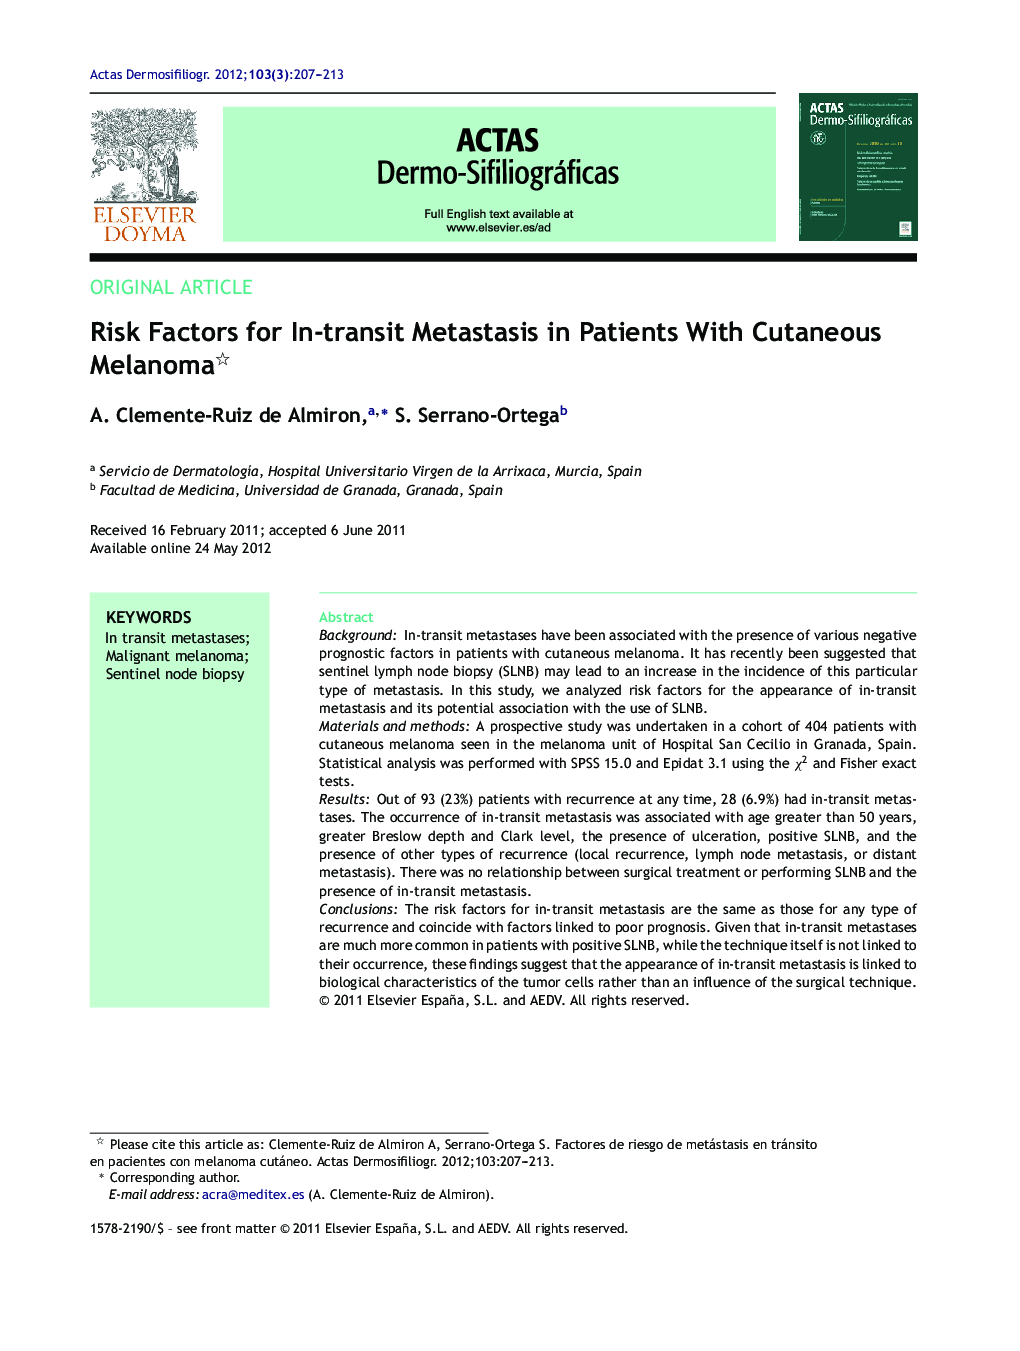 Risk Factors for In-transit Metastasis in Patients With Cutaneous Melanoma 